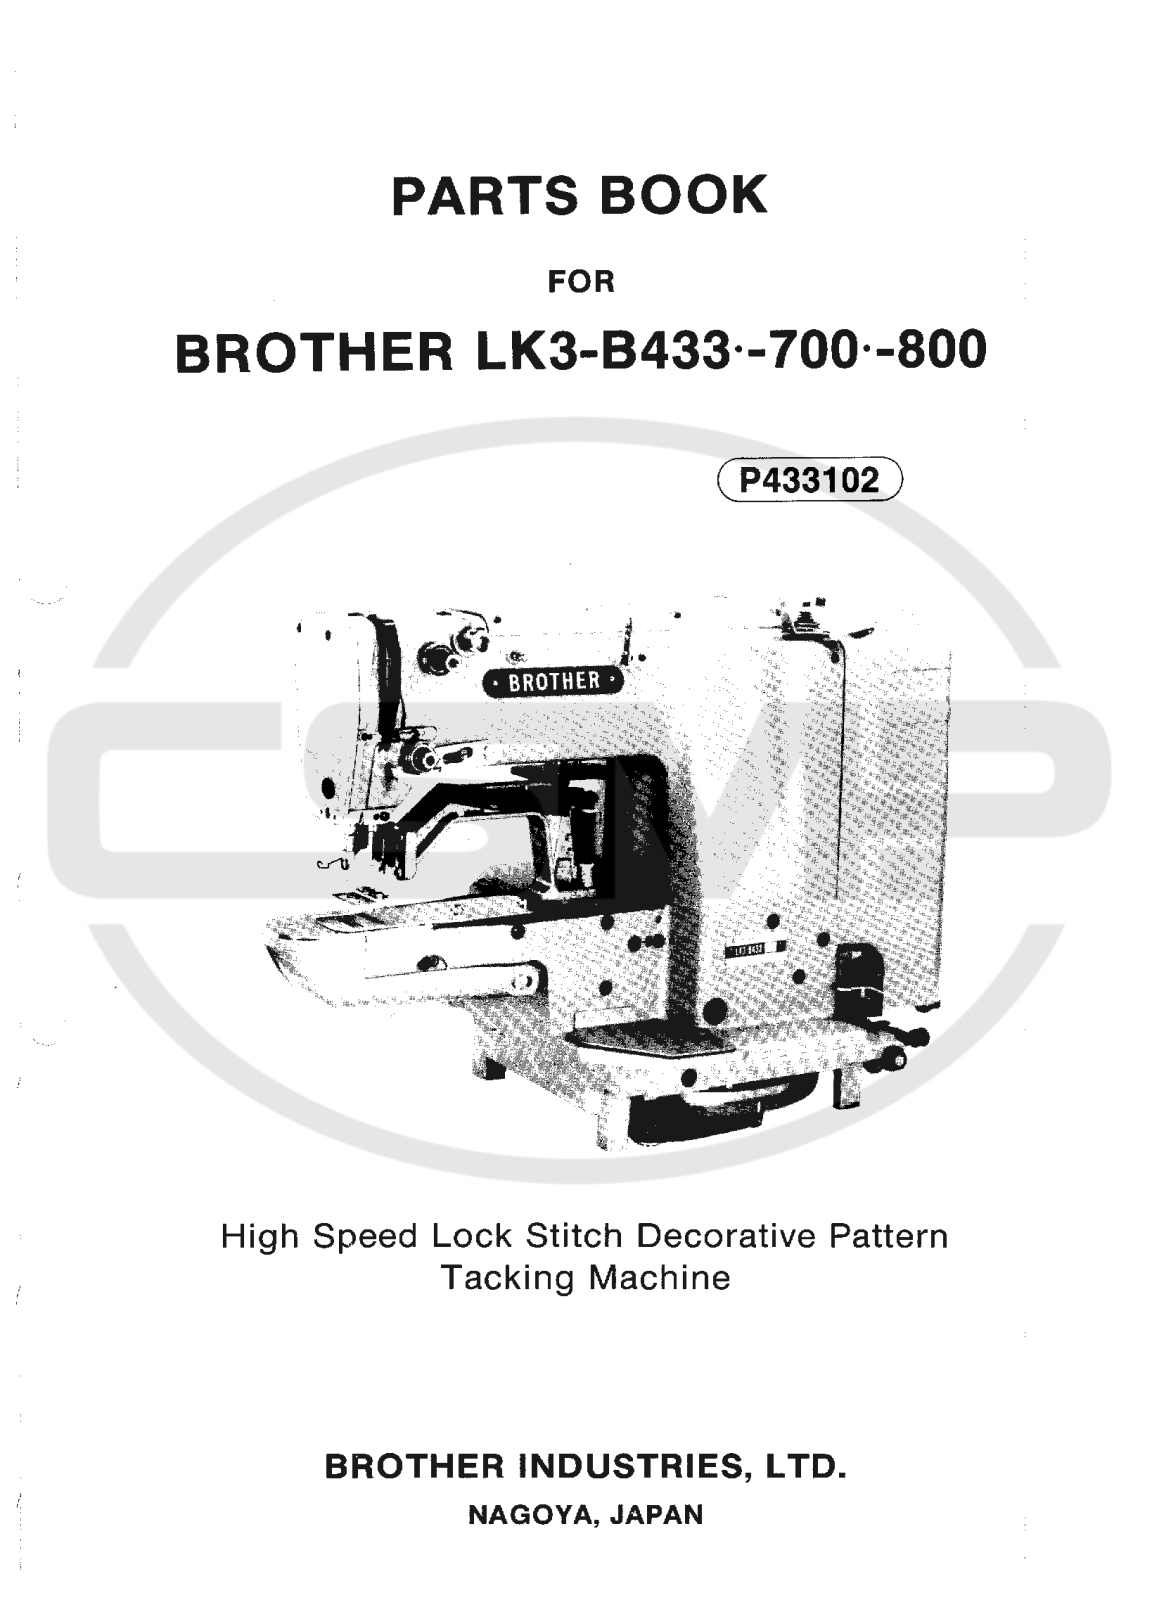 Brother LK3 B800 Parts Book